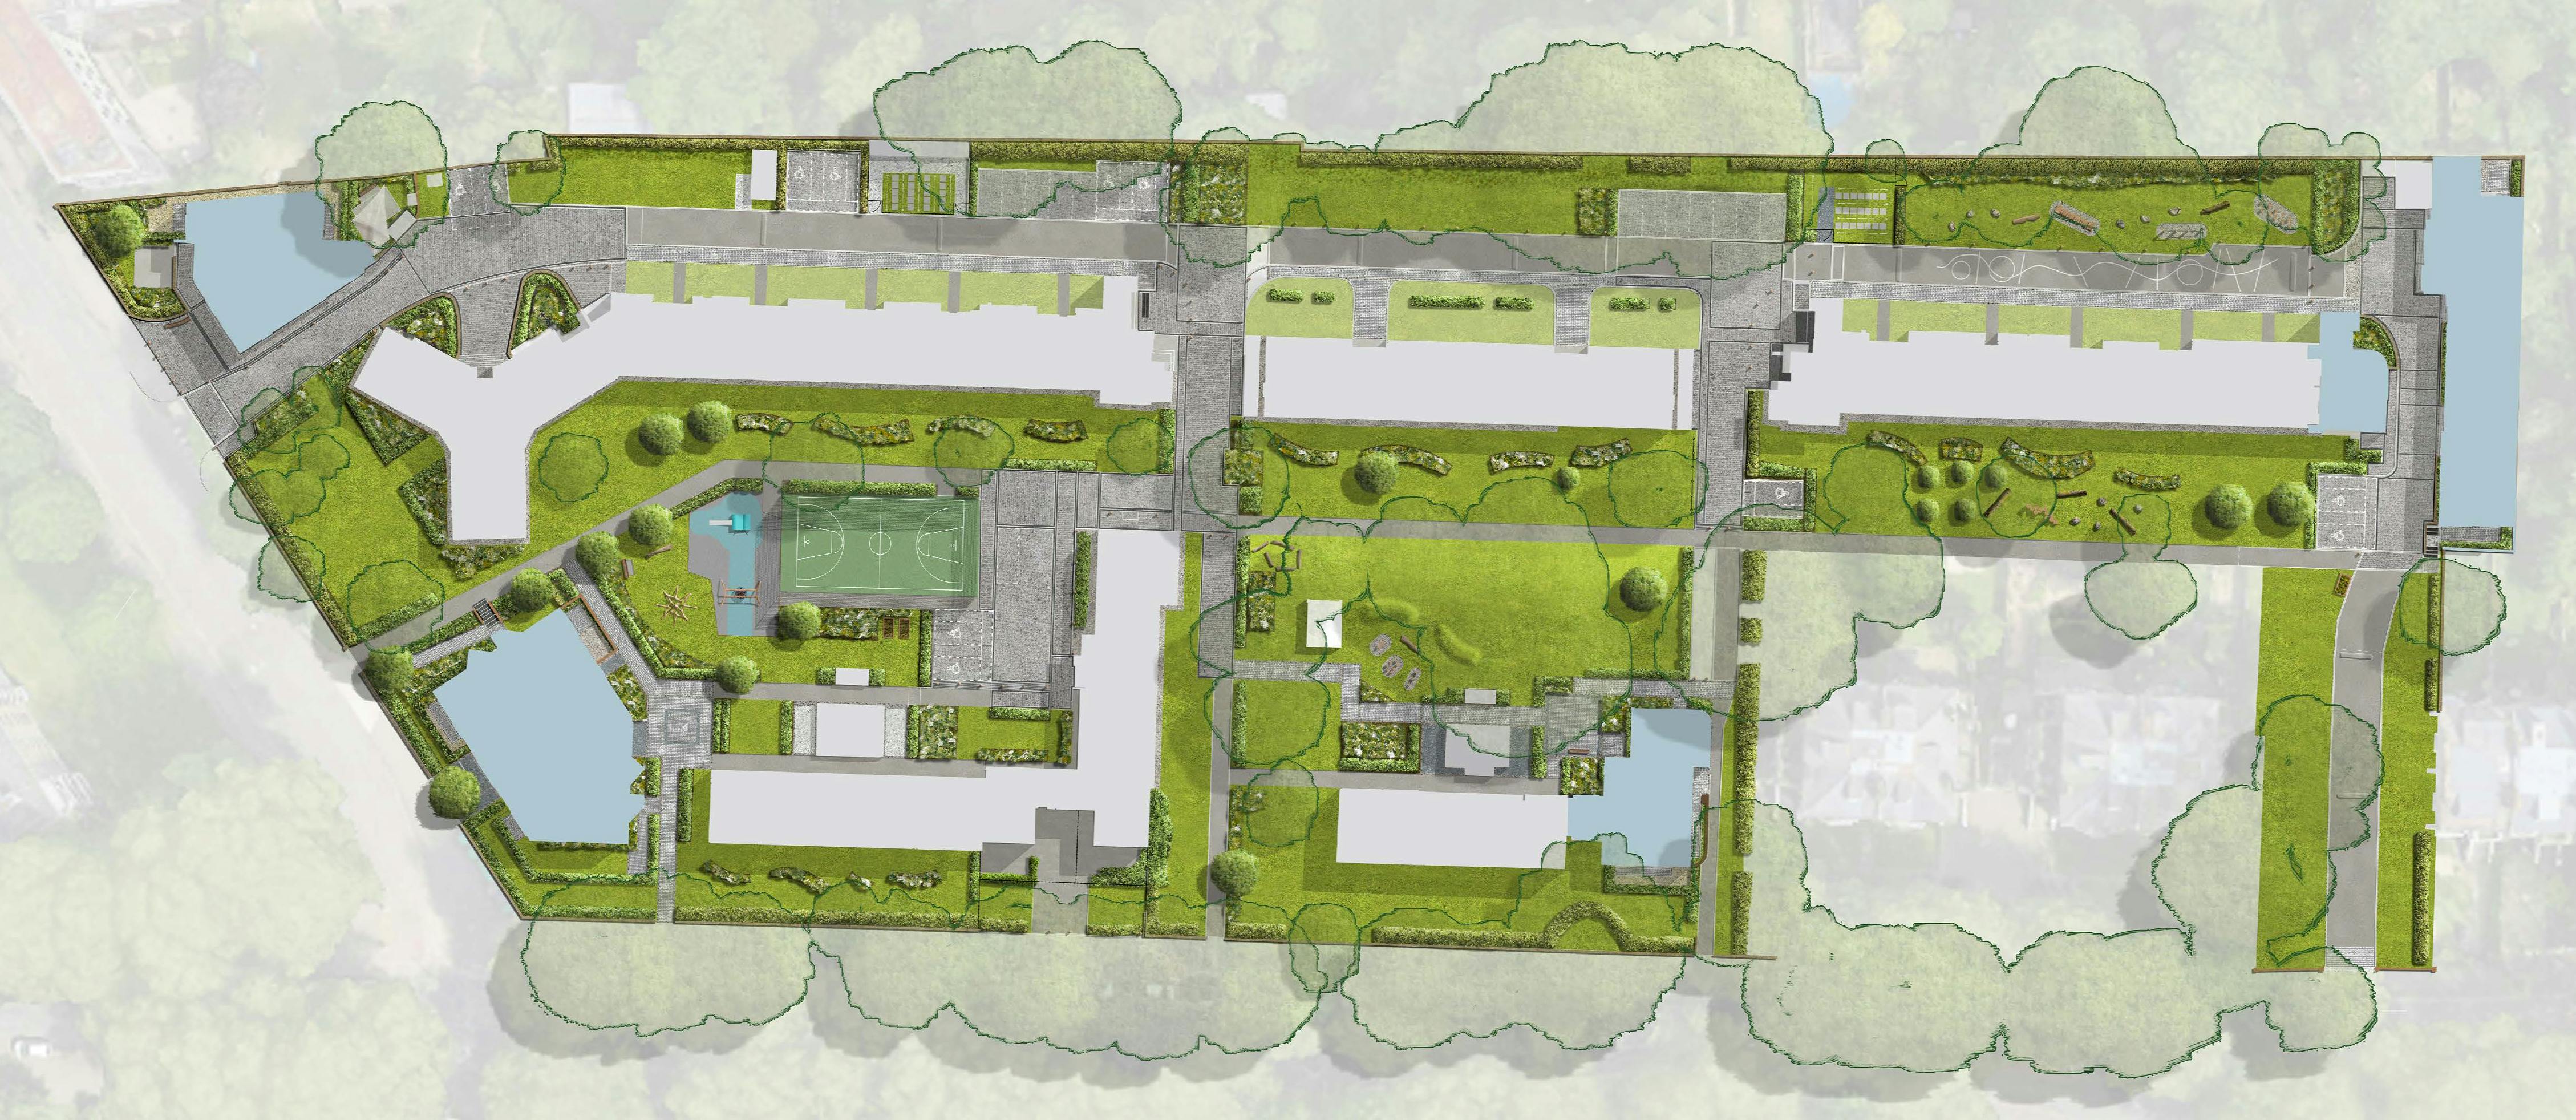 Park View Estate site plan of the green spaces